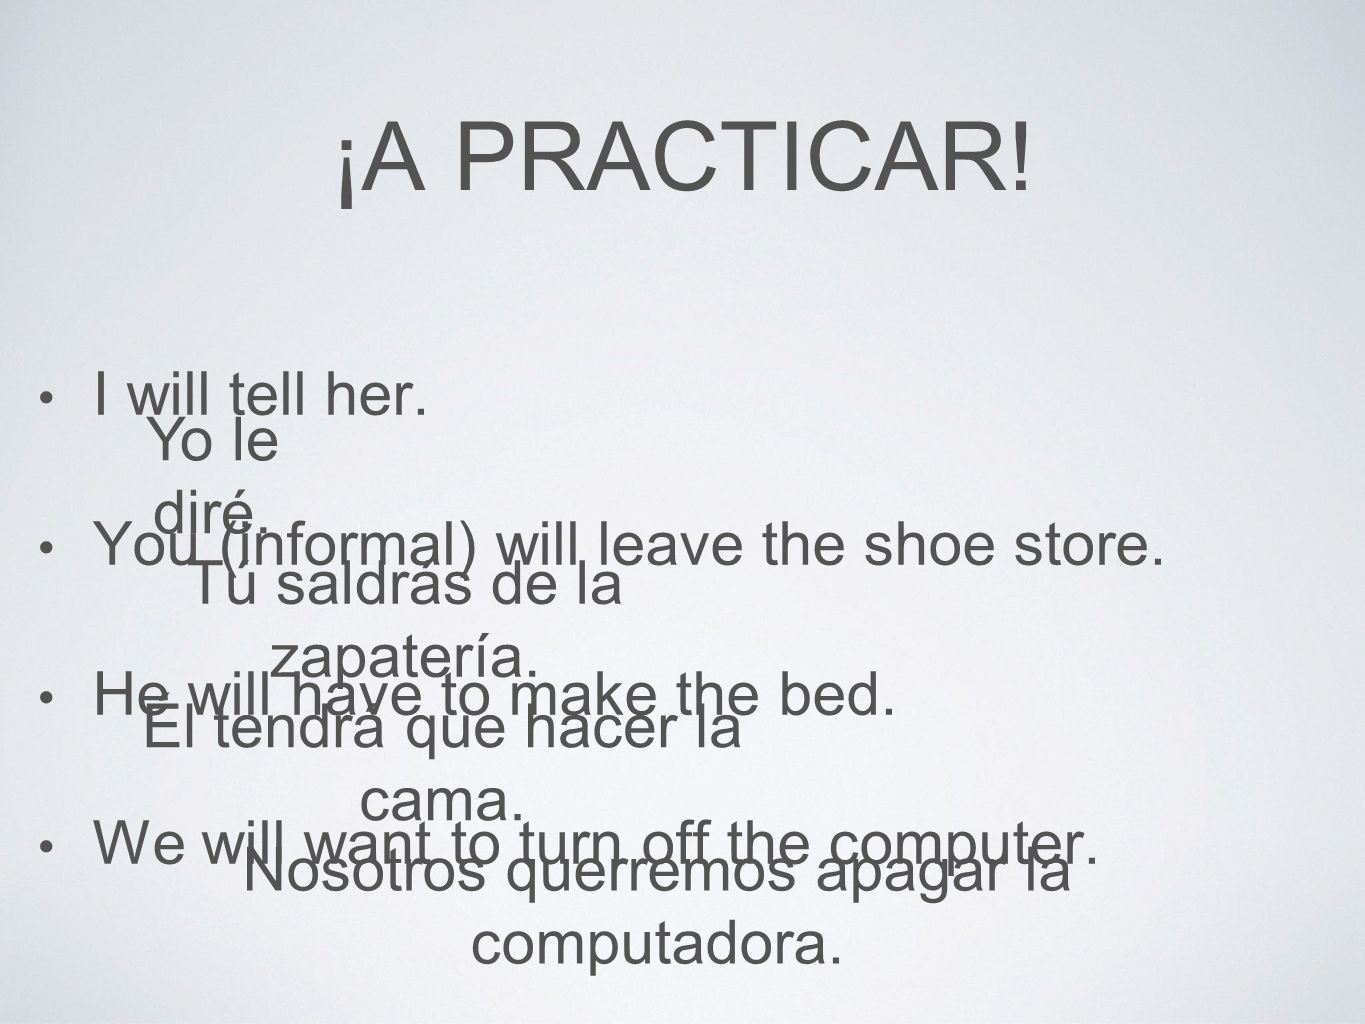 ¡A PRACTICAR. I will tell her. You (informal) will leave the shoe store.